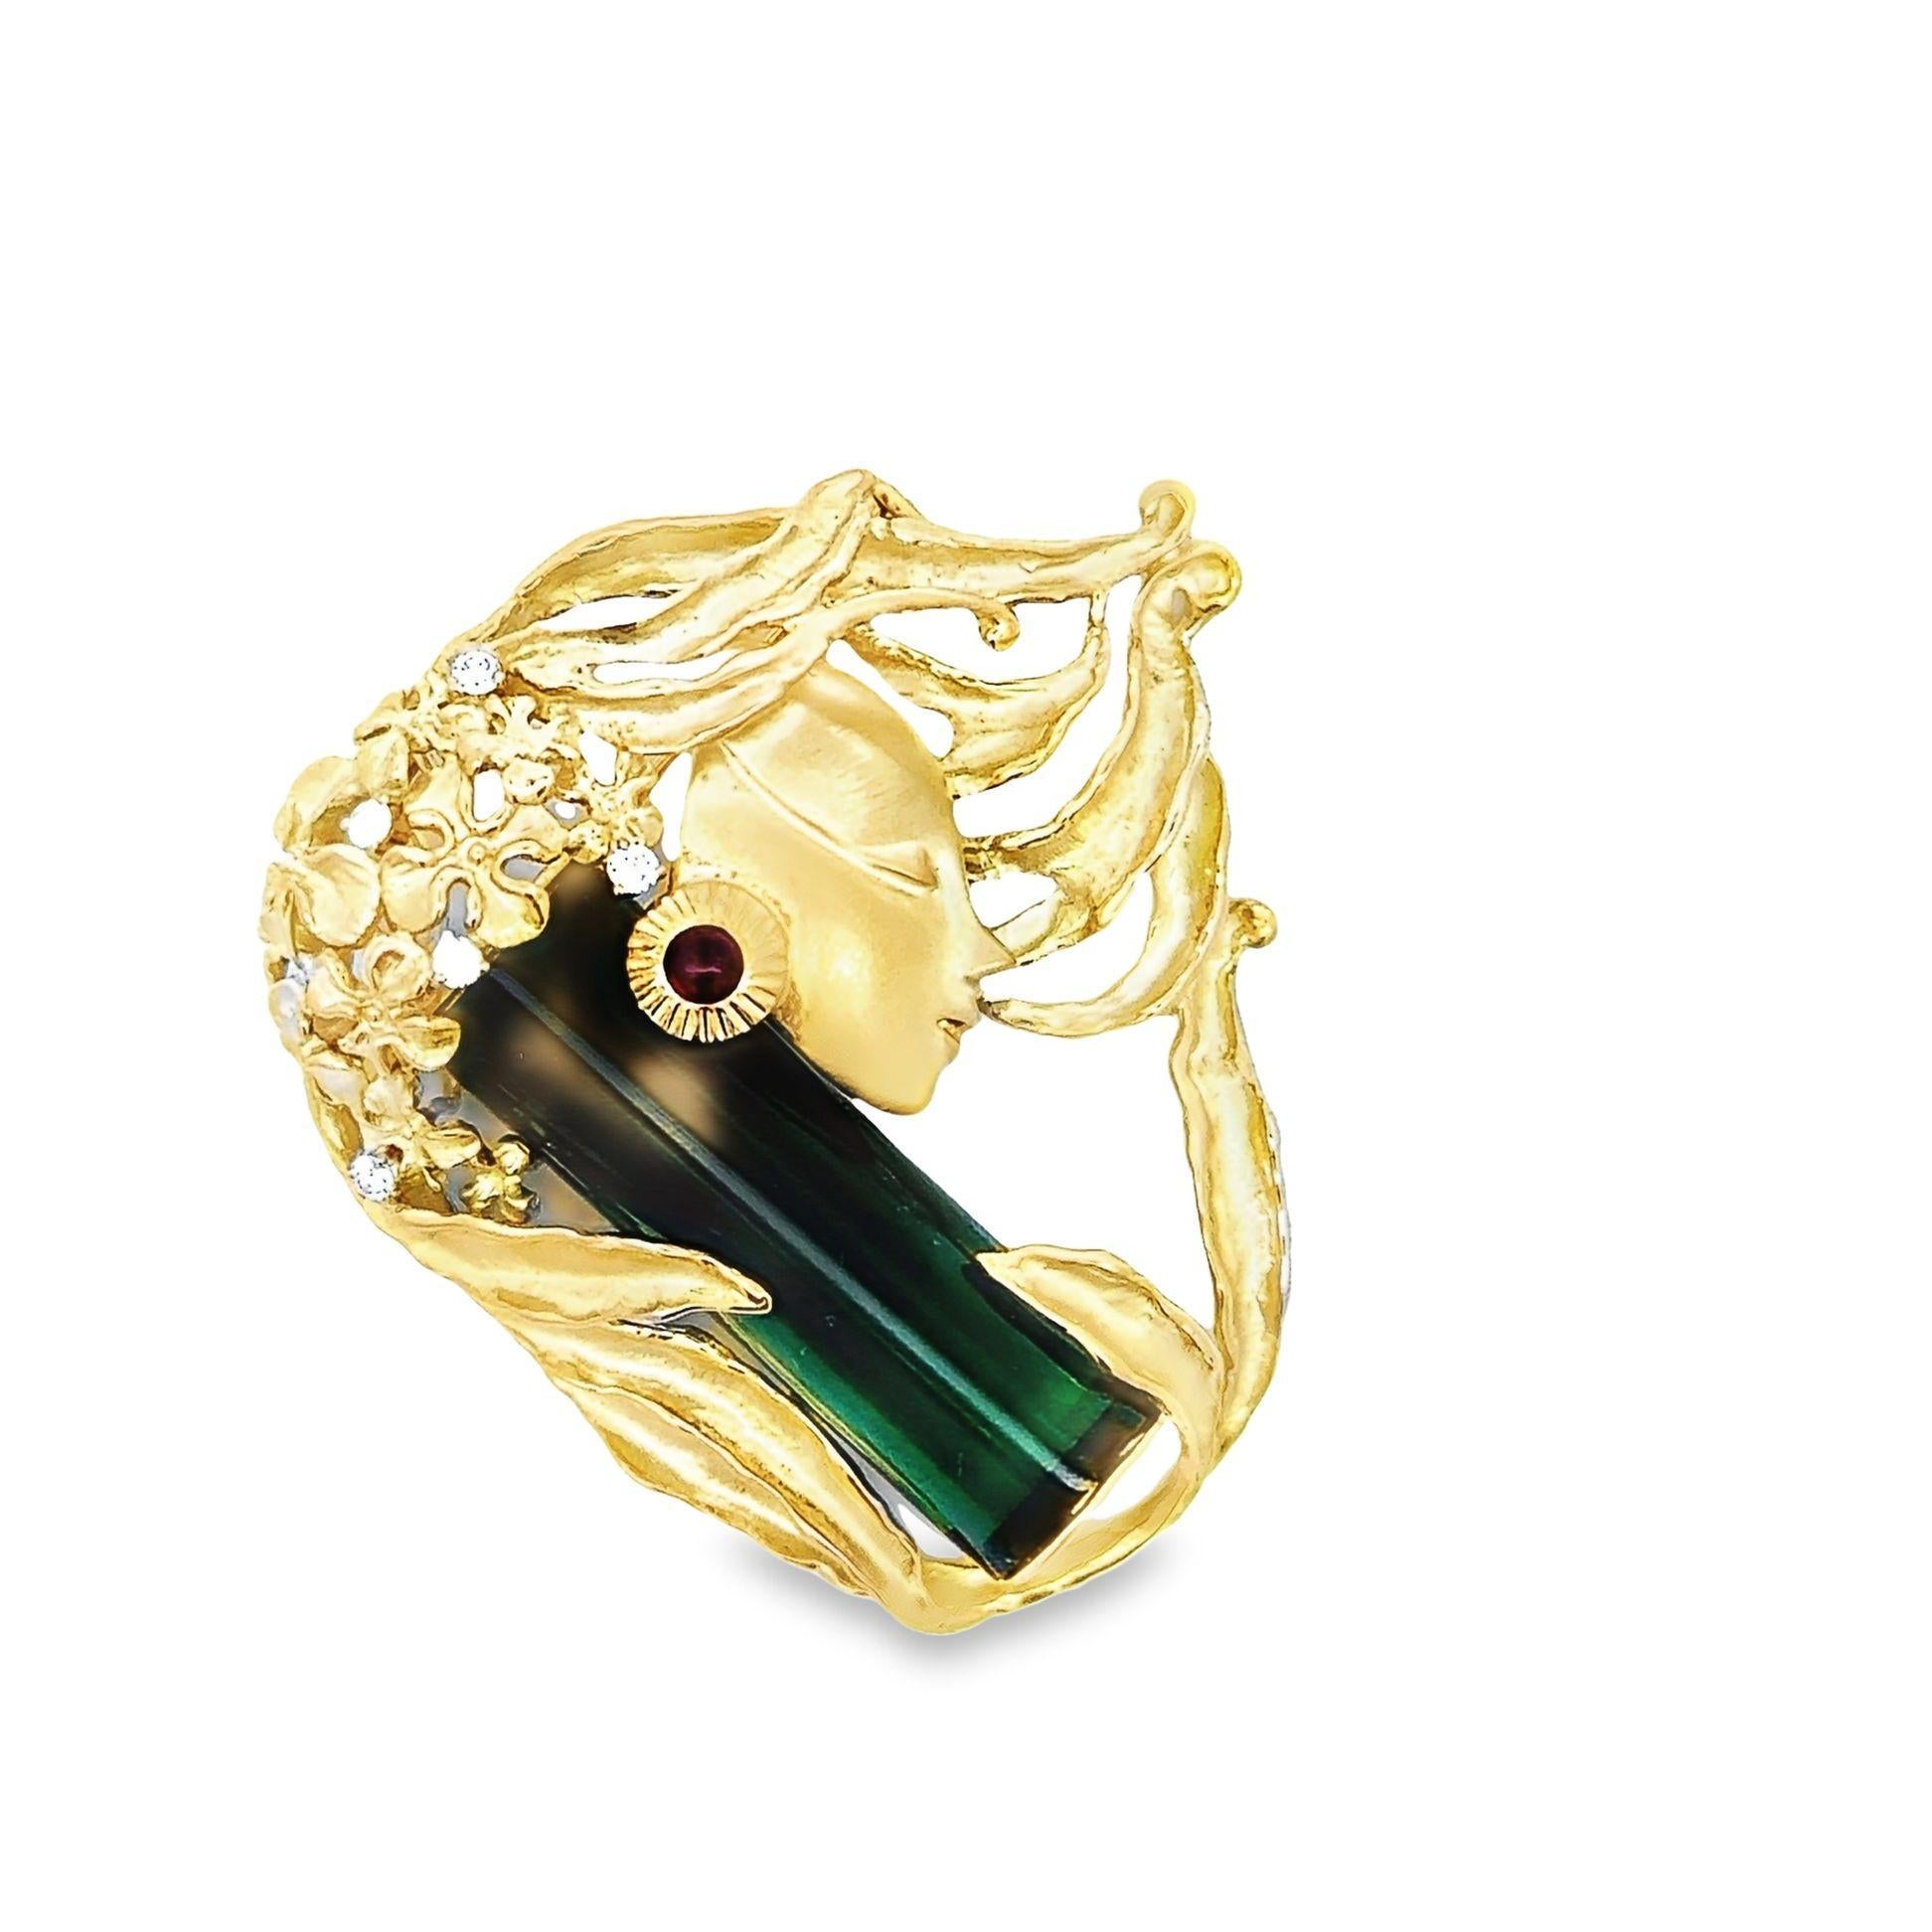 Cabochon 27.16 Carat Green Tourmaline 18k Yellow Gold Art Nouveau Inspired Brooch For Sale